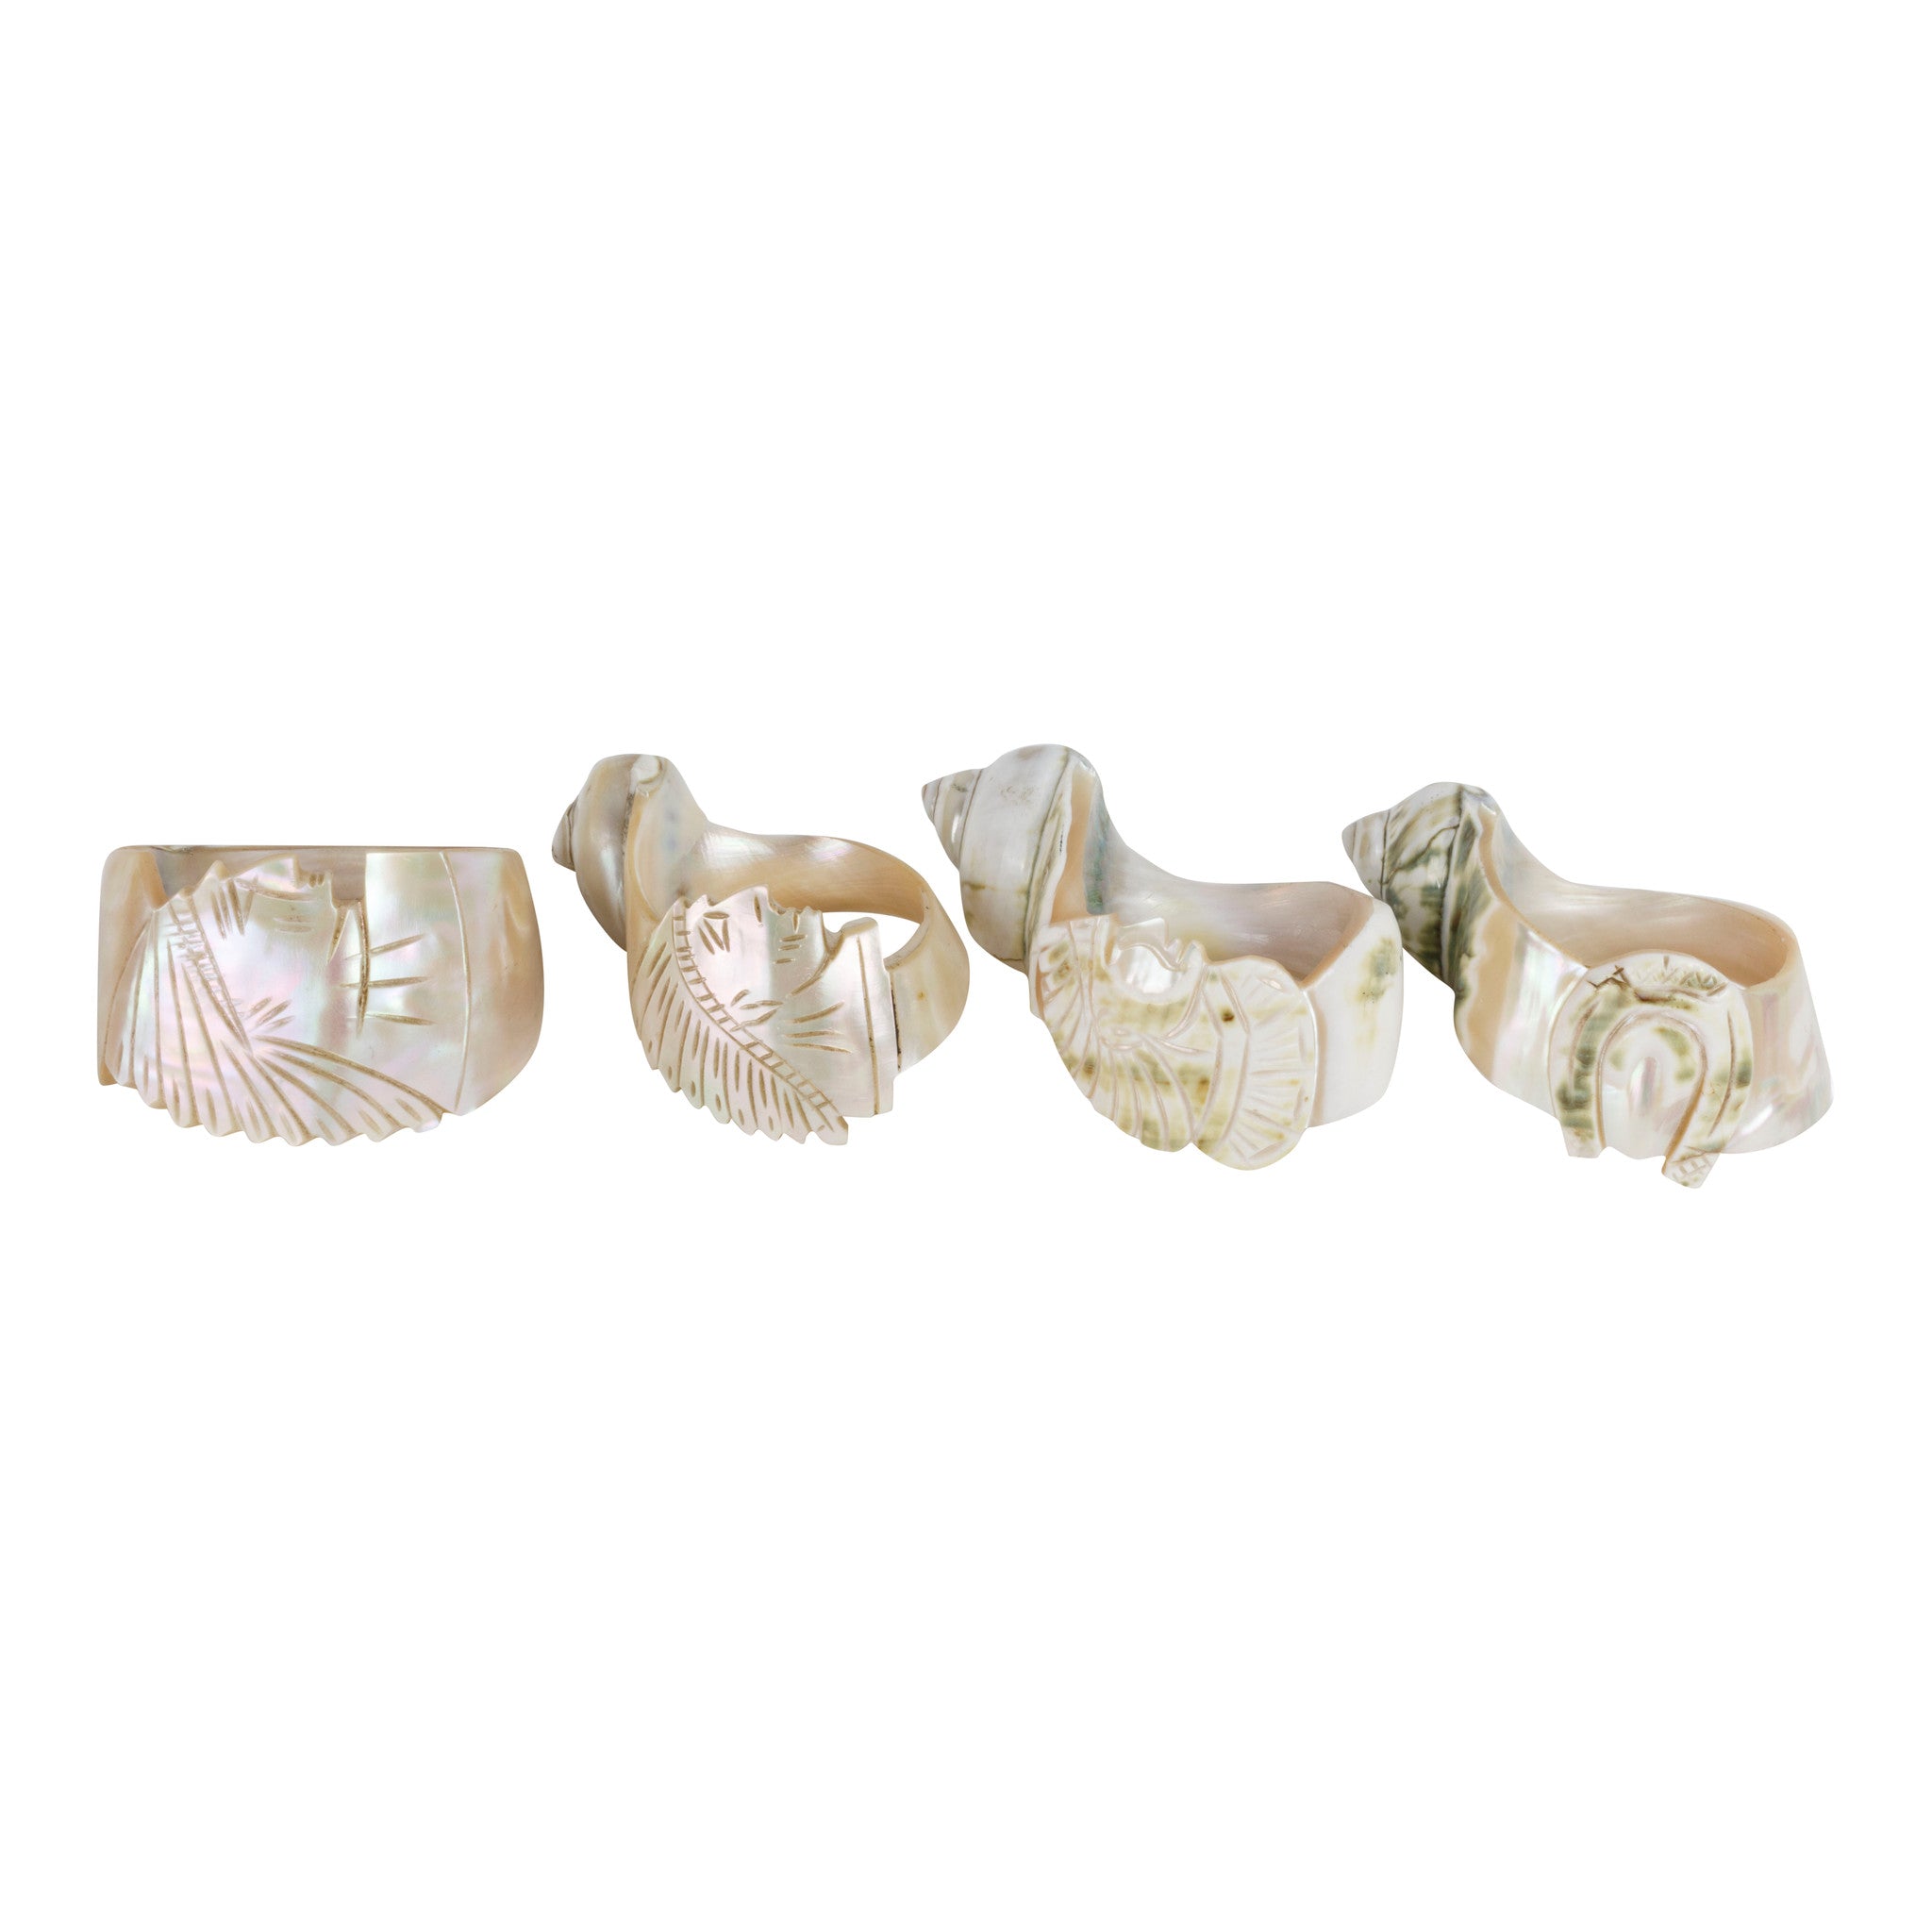 Hand Carved Conch Napkin Rings, Furnishings, Dining, Serveware